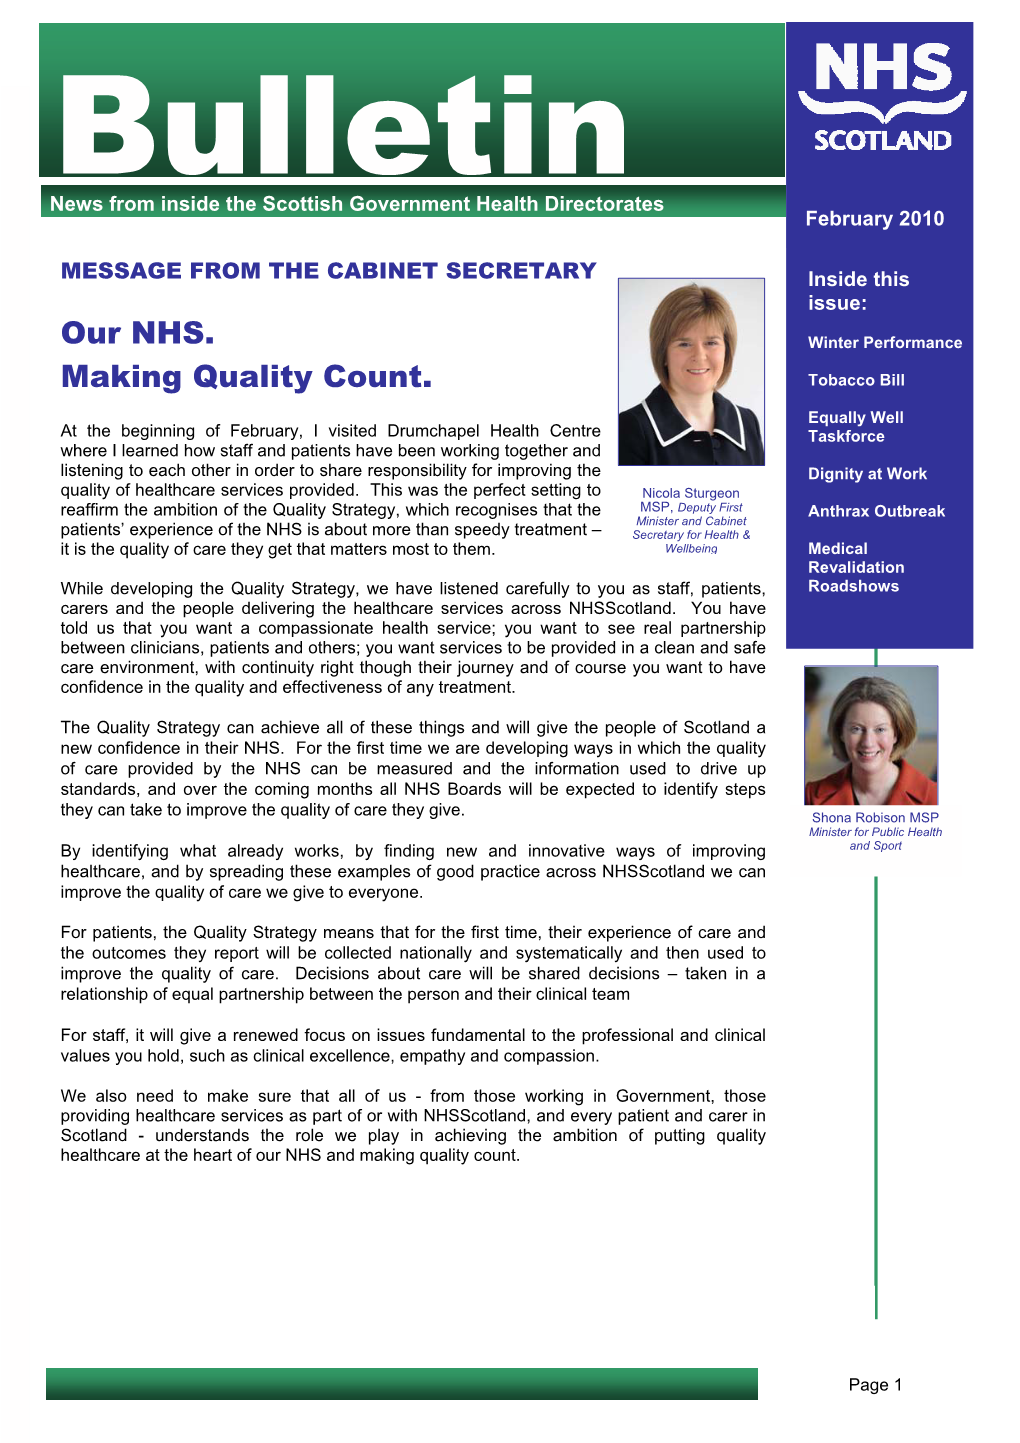 Message from the Cabinet Secretary for Health & Wellbeing